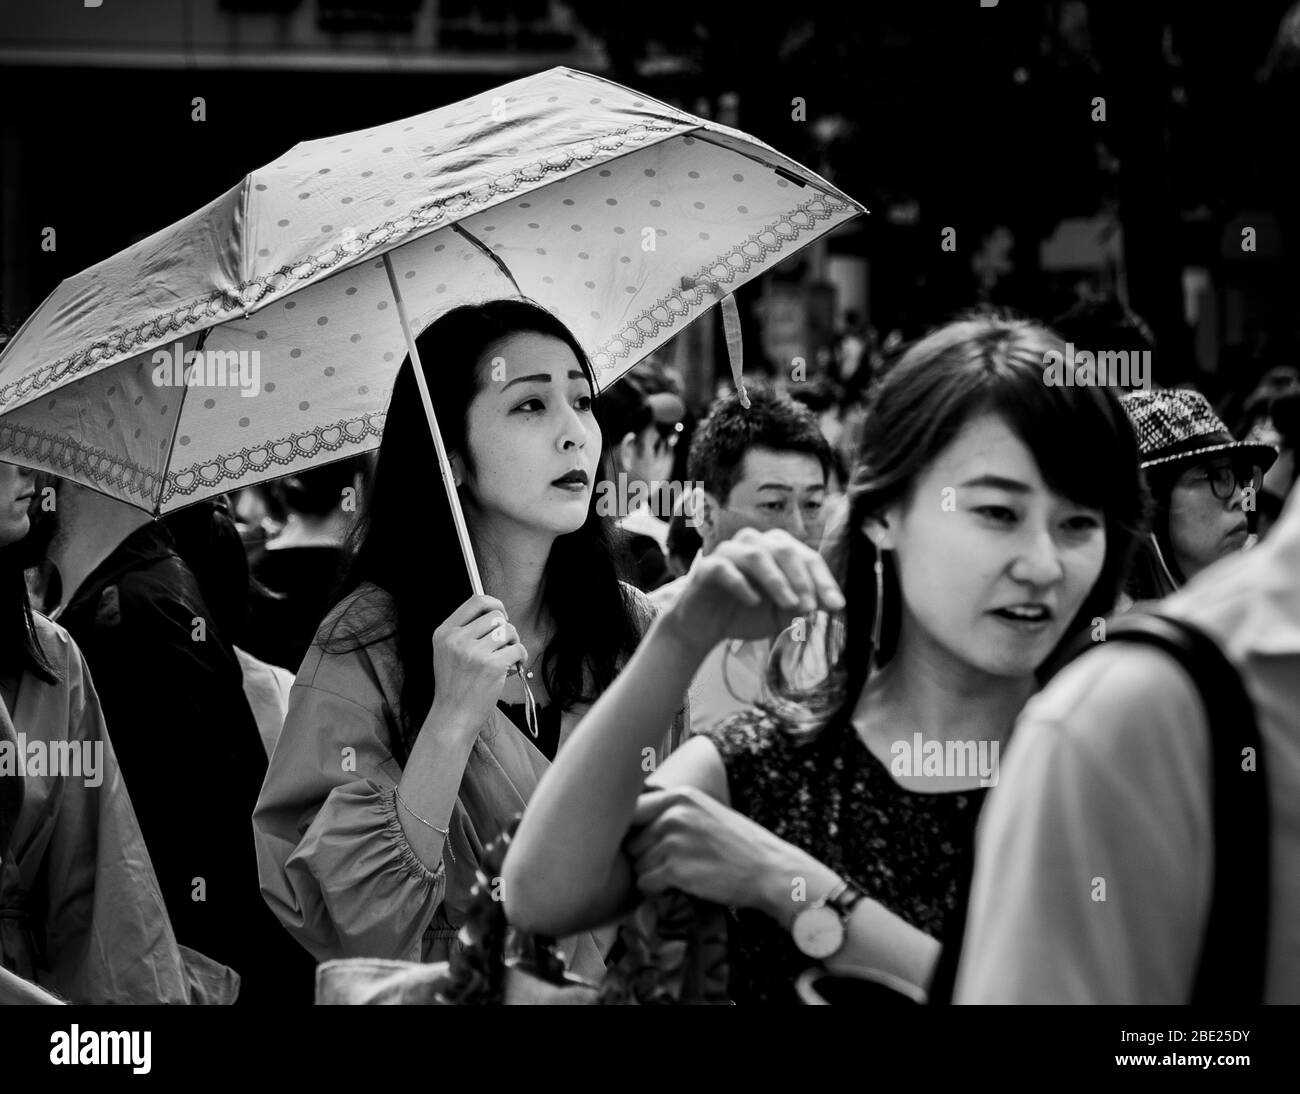 Pedestrian scene with umbrella and Street Life in Tokyo, Japan Stock Photo